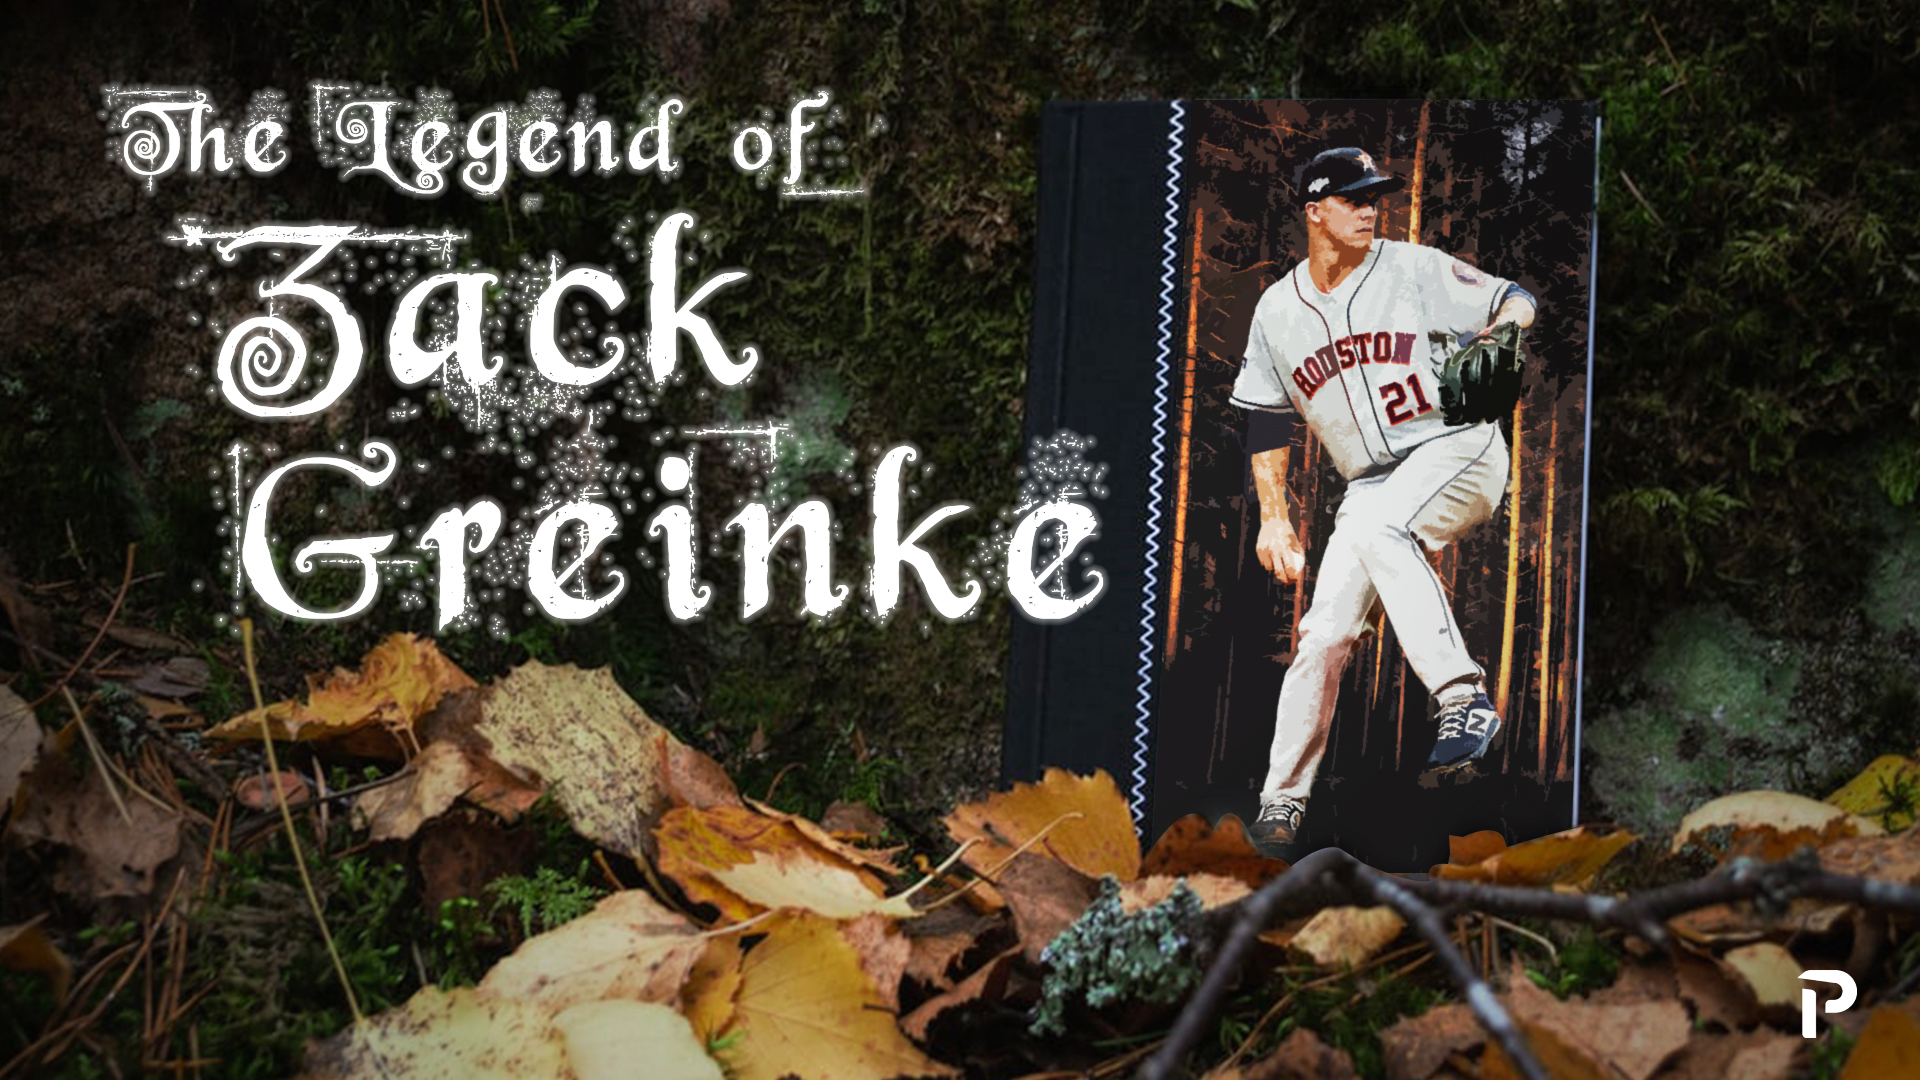 Outer-Third Omnipotence: Why No One Can Score on Zack Greinke